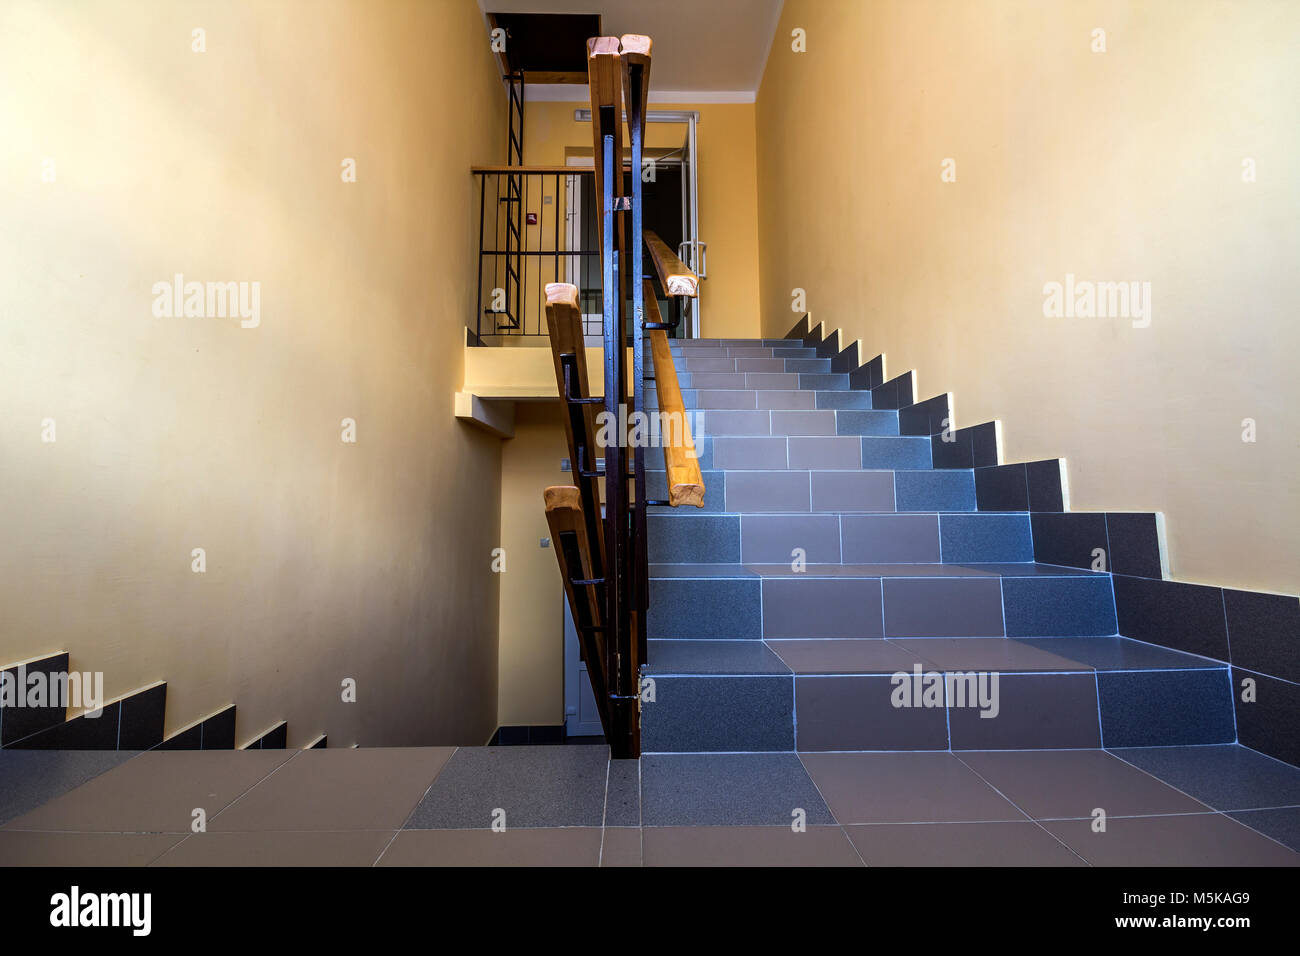 Staircase In Residential Building Interior With Stairs